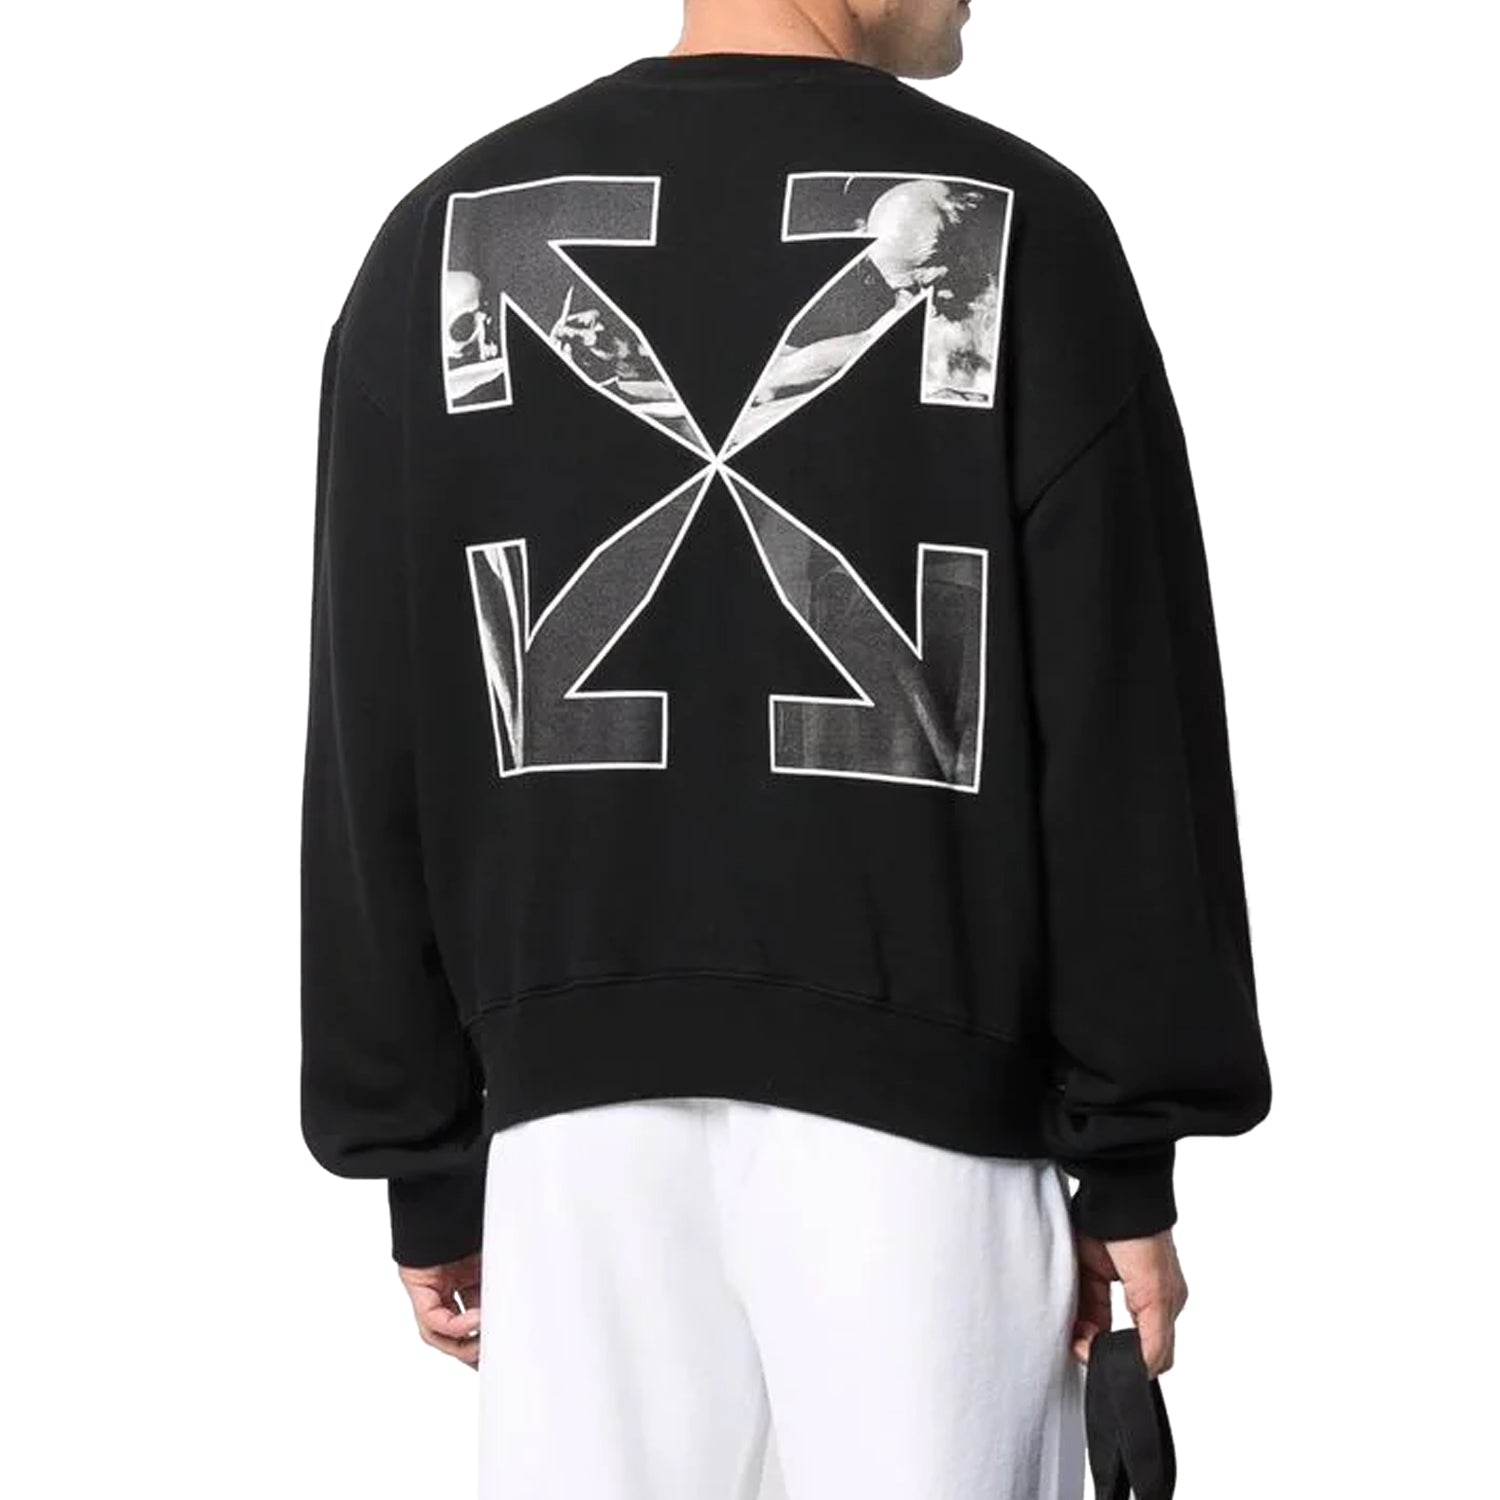 Off-white Caravag Arrow Over Crewneck Mens Style : Omba058c99fle00